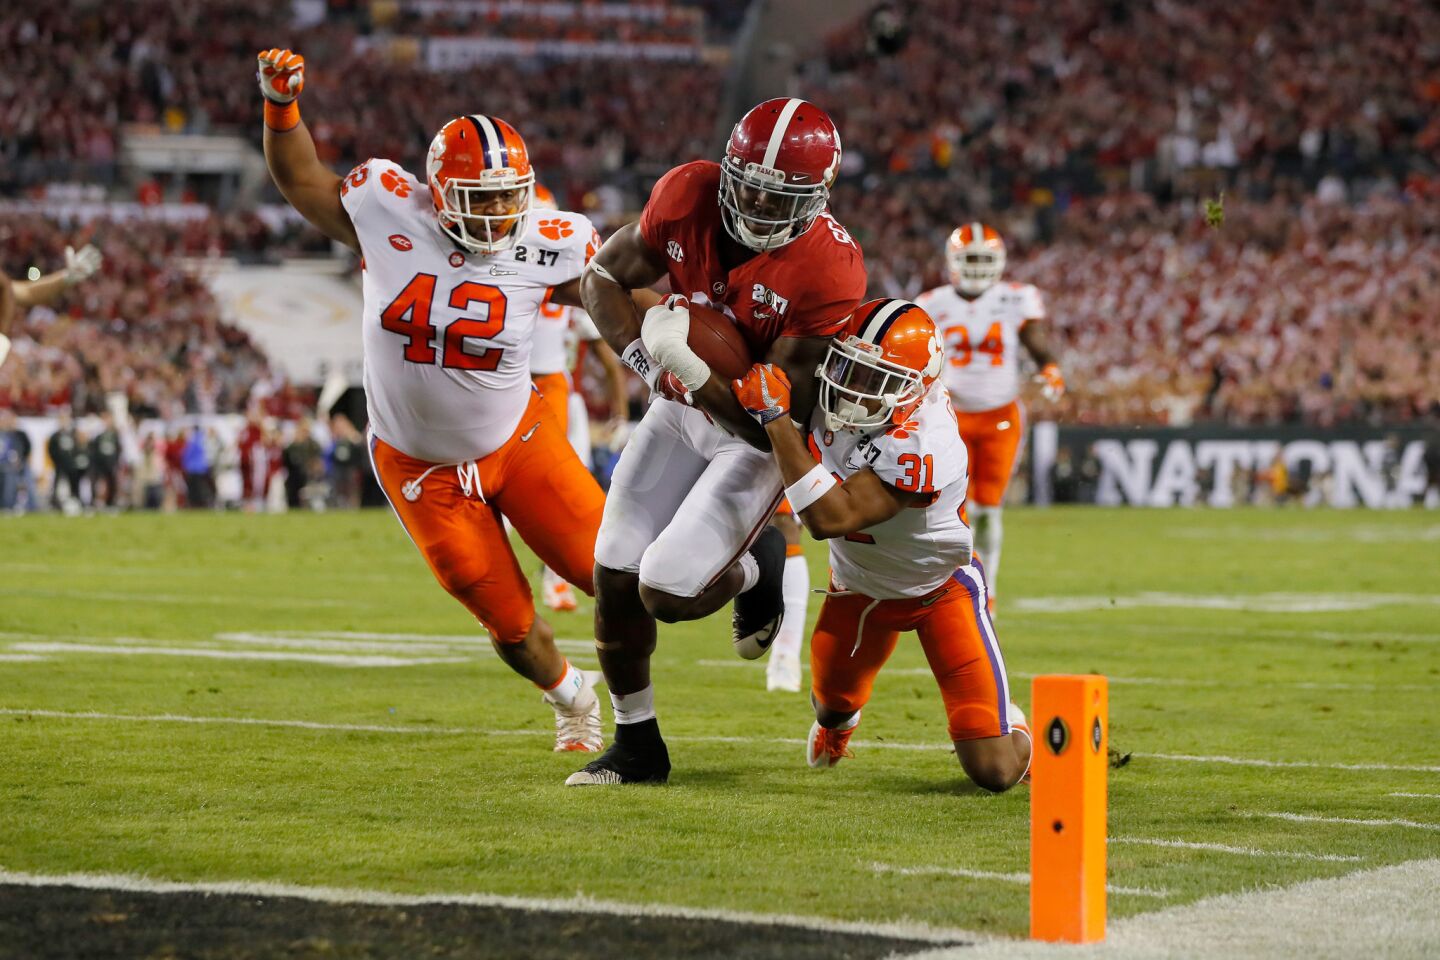 Alabama running back Bo Scarbrough beats the Clemson defense for a 25-yard touchdown run during the first quarter.